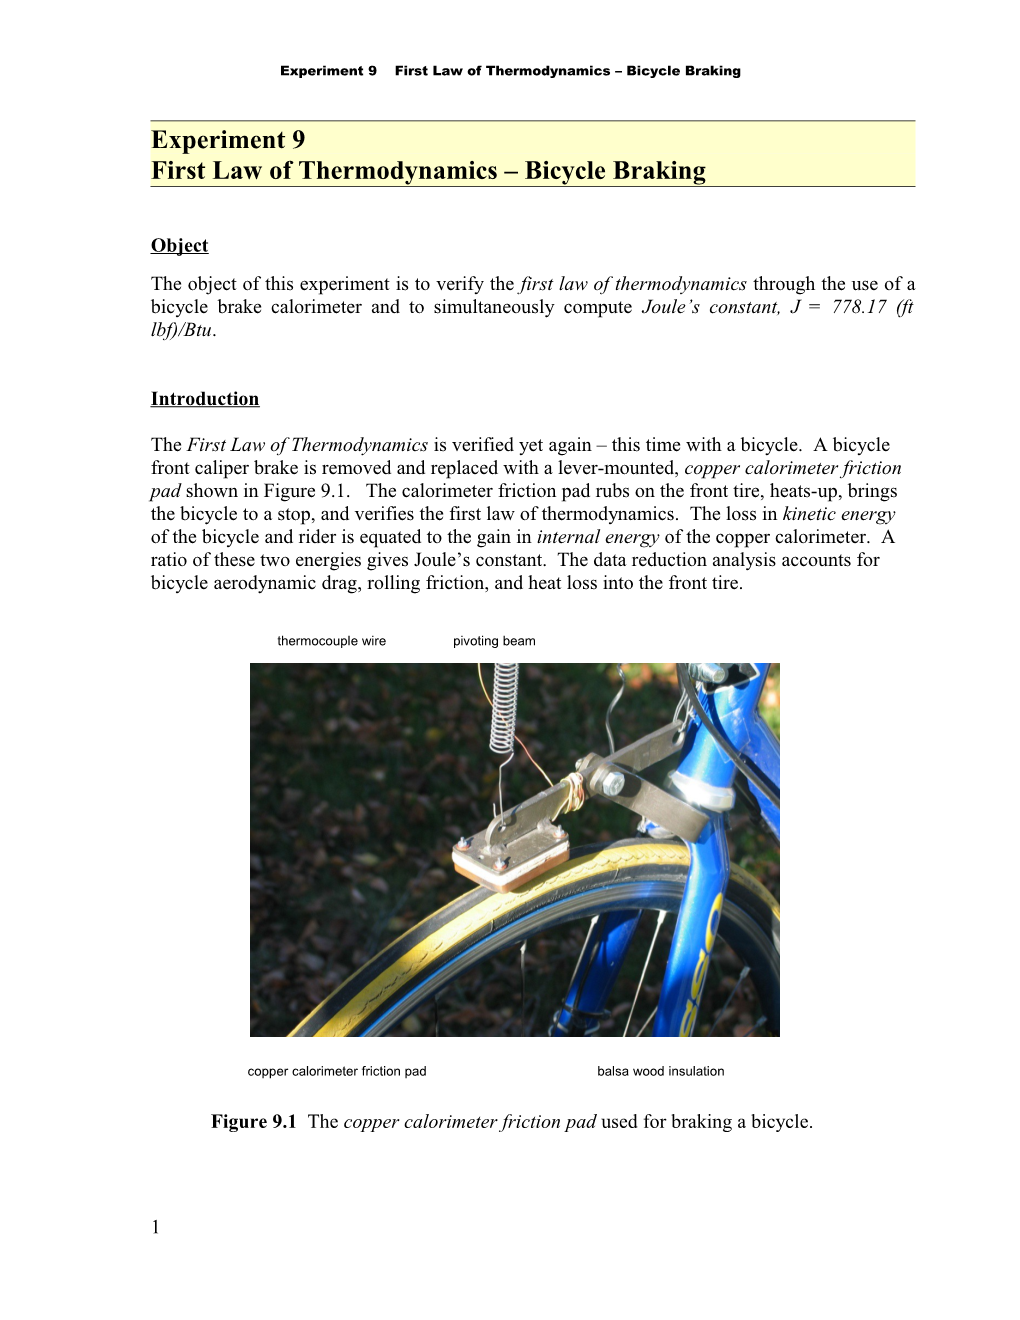 First Law of Thermodynamics Bicycle Braking